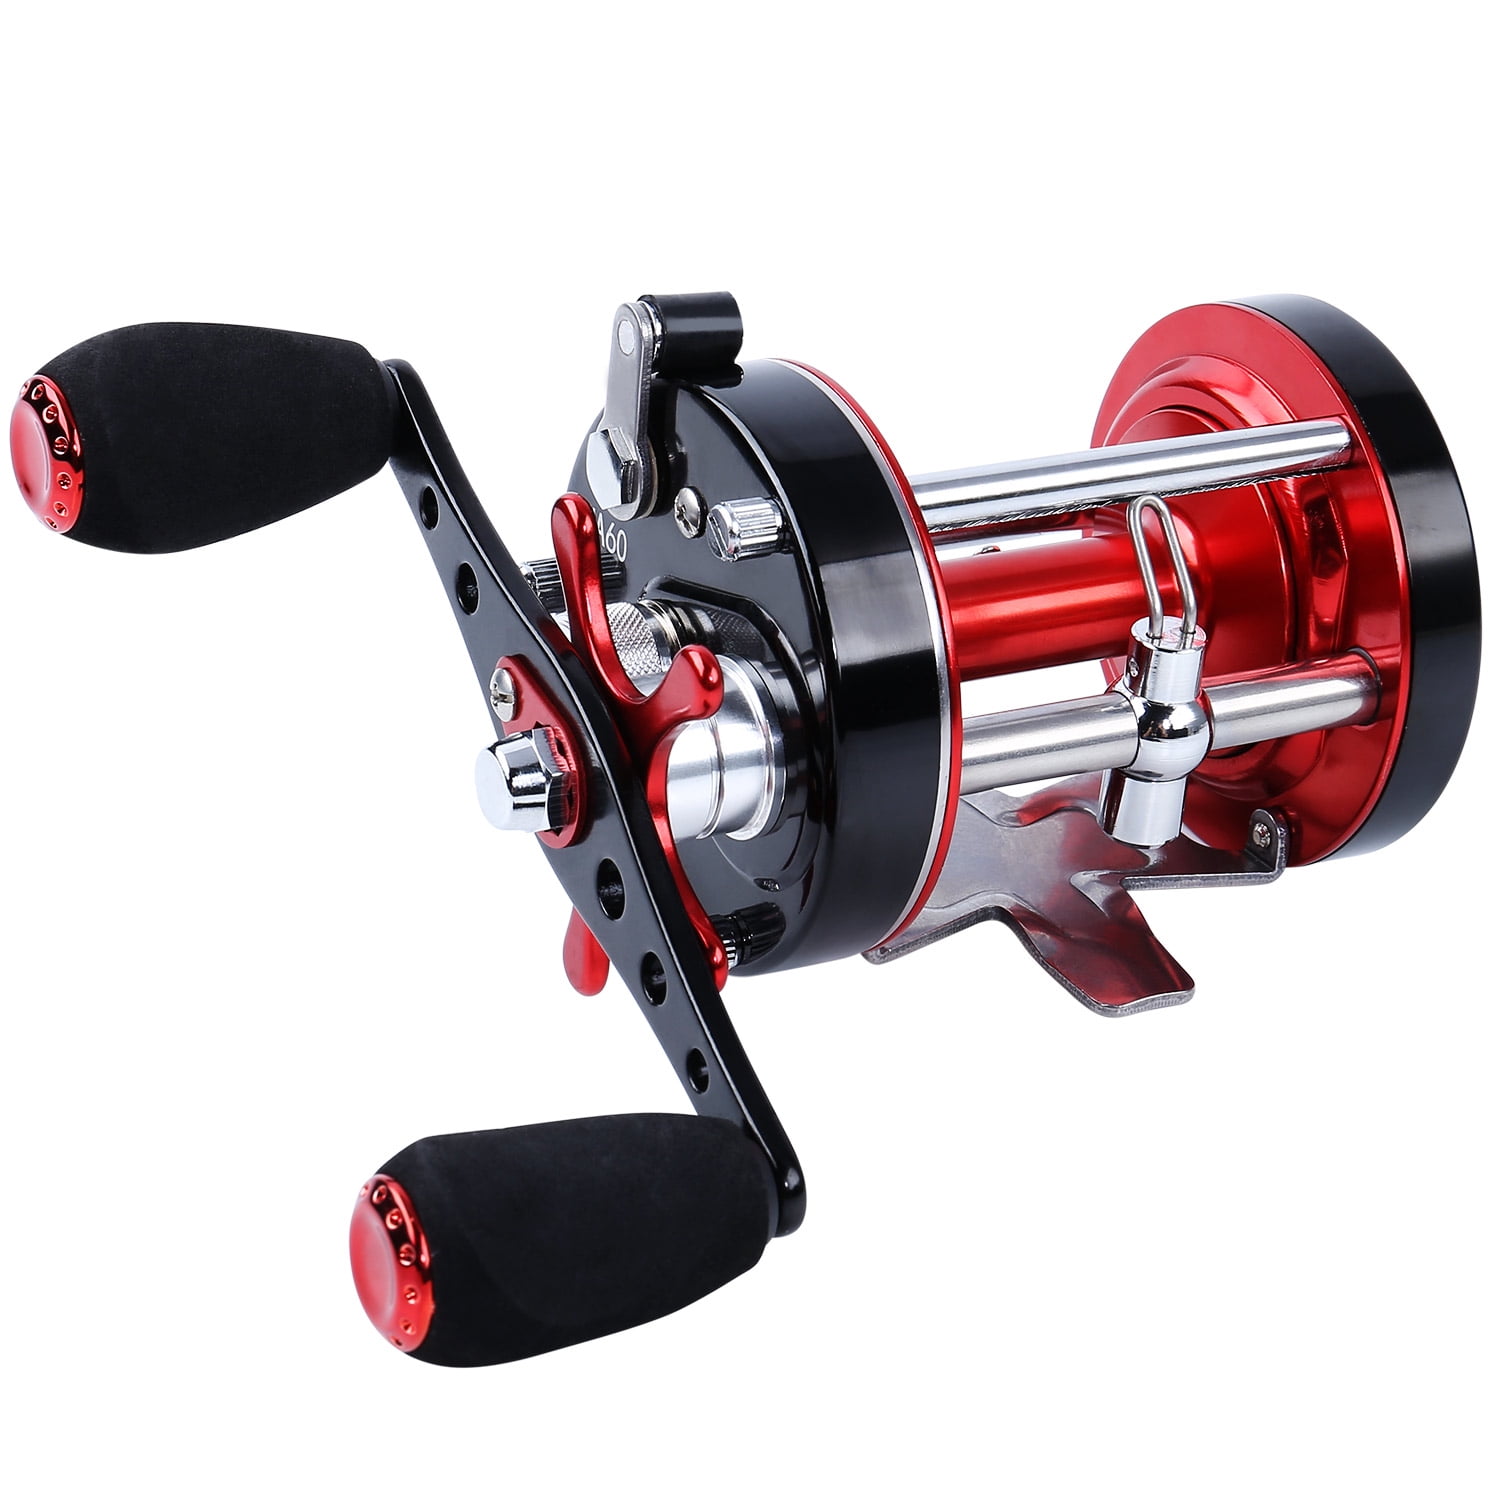 Brand New Right Handed-Round Baitcasting Saltwater Fishing Trolling Reels 